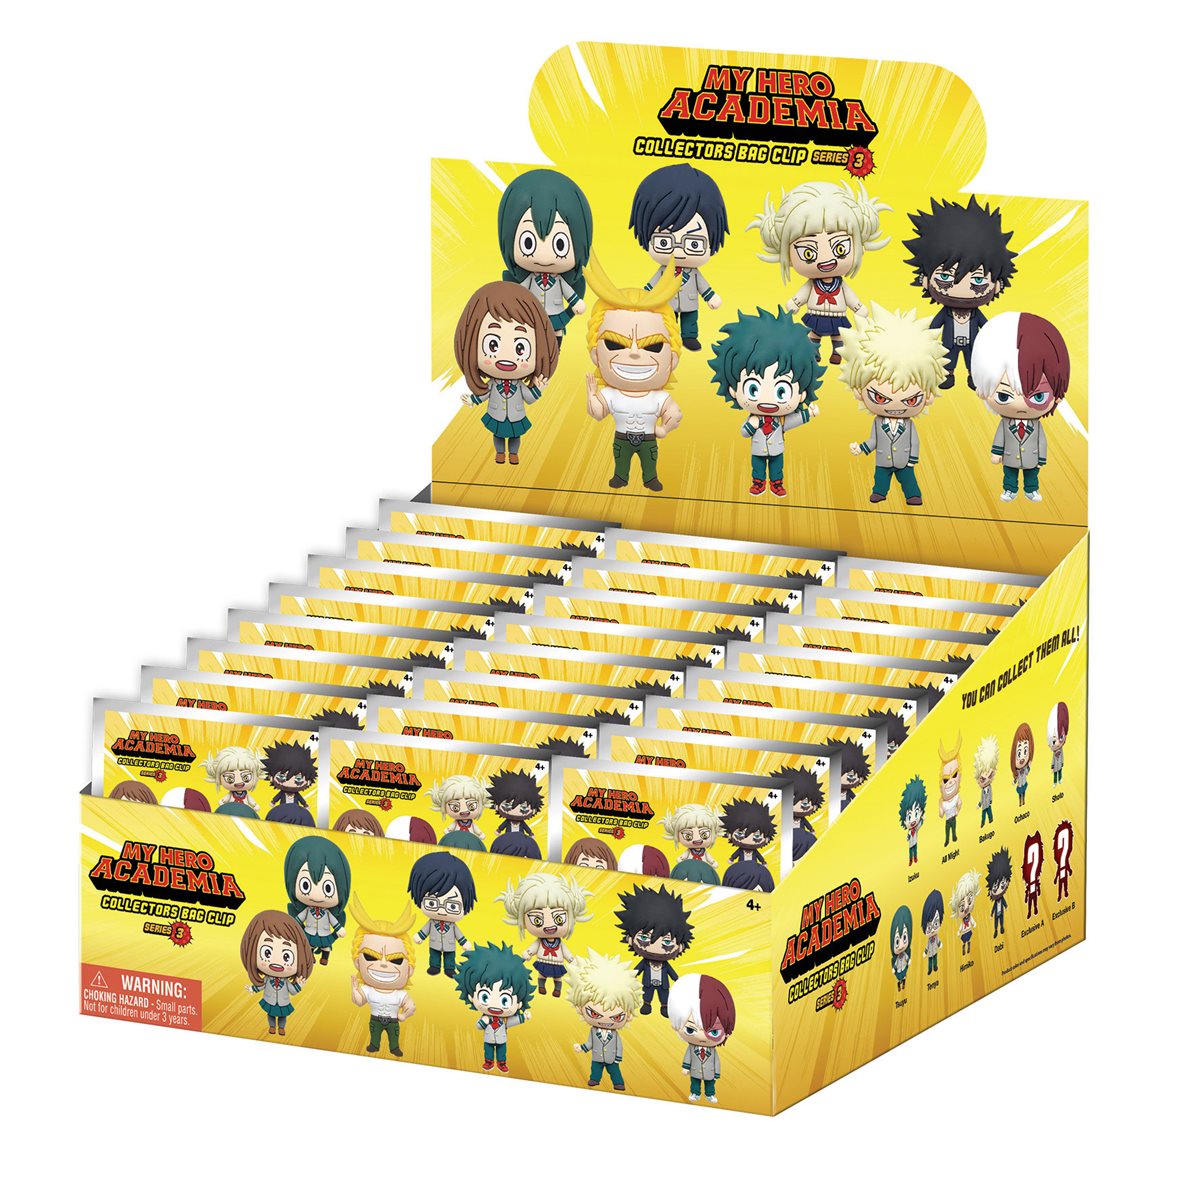 My Hero Academia Merch Set 12 Pack Mha Pen 30 Pack Lomo Card 1 Pack Hanging Décor 4 Pack Button Pin 1 Pack Ruler 7 Piece Bookmarks 1 Roll of Tape